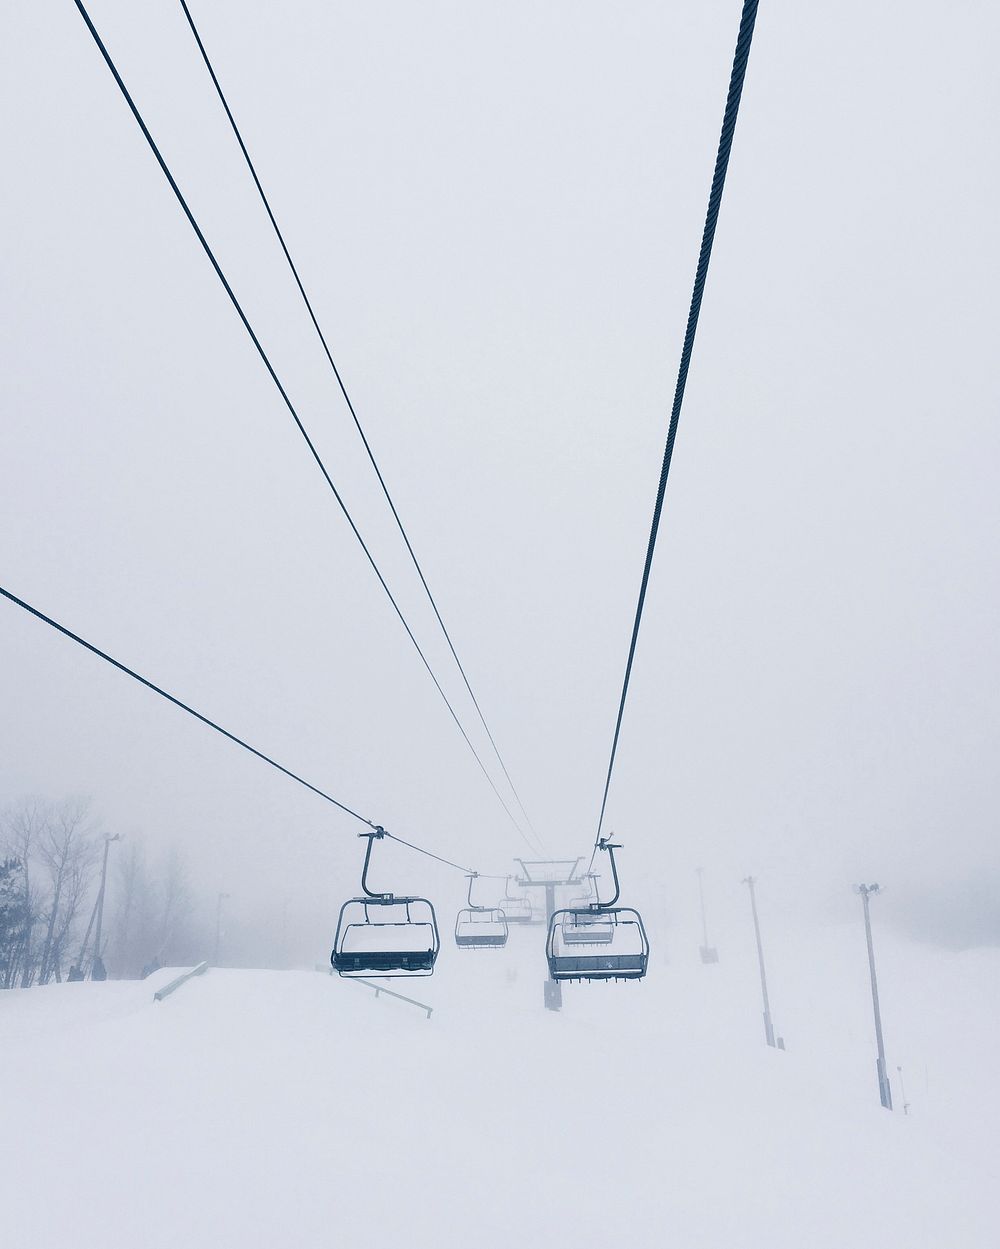 Foggy chairlift at Mont-Tremblant, Québec, Canada.. Original public domain image from Wikimedia Commons